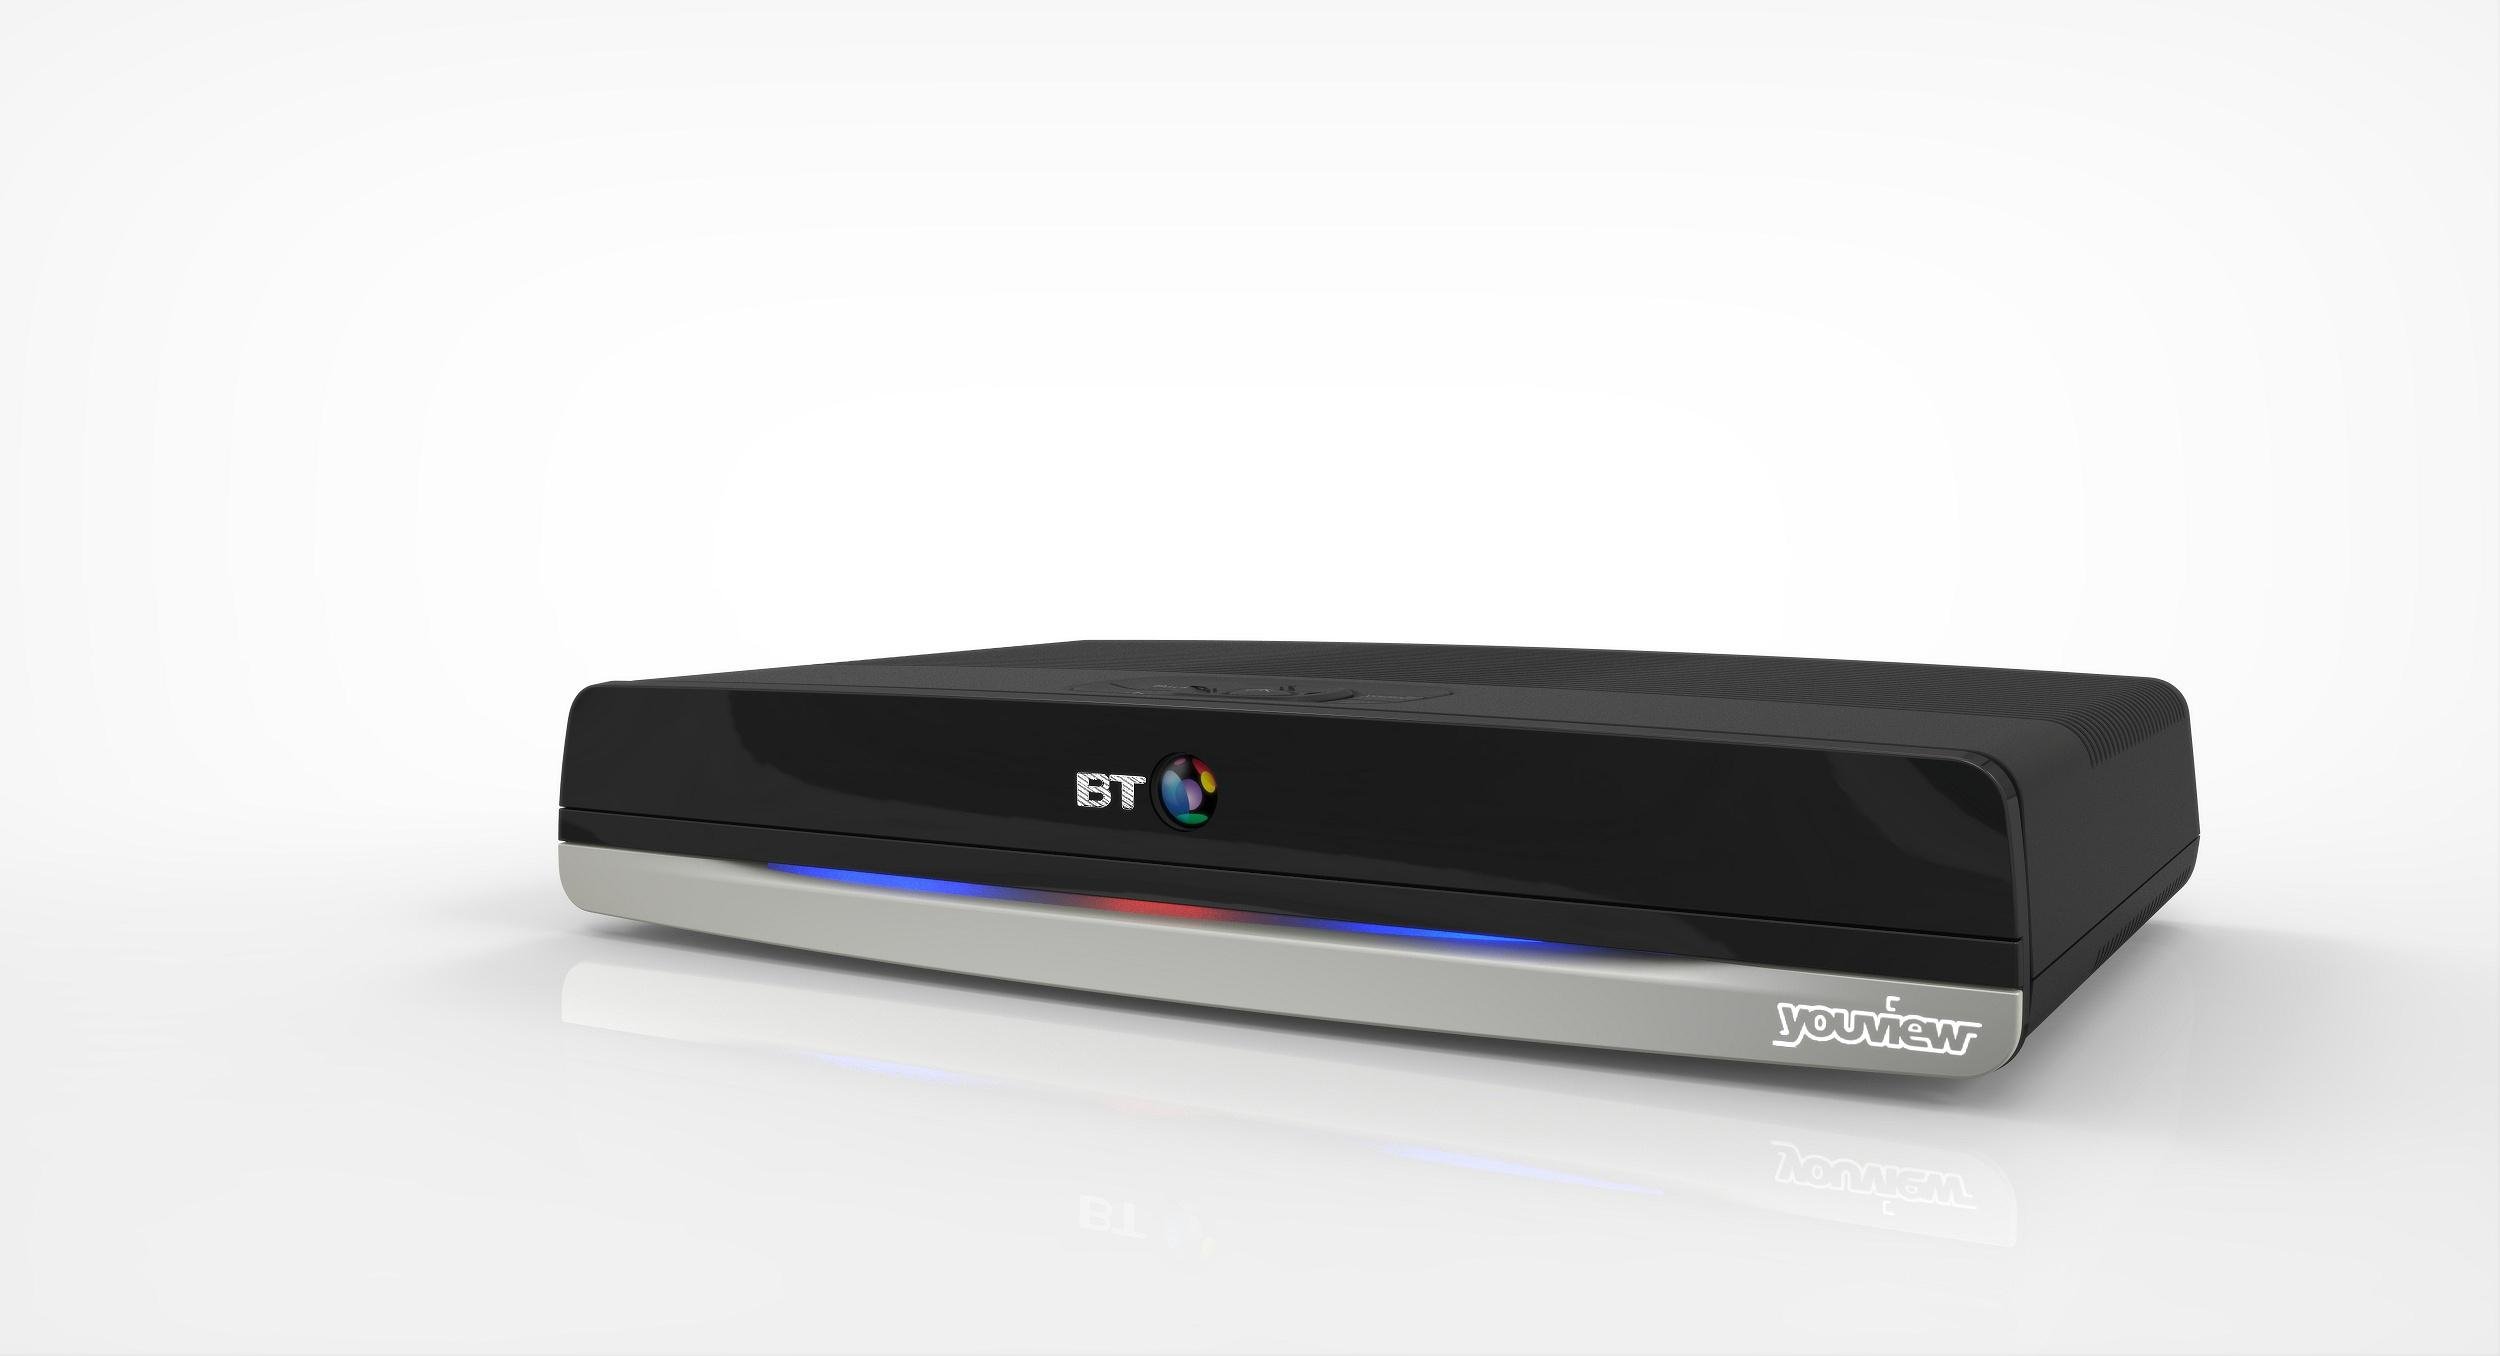 BT DTR-T2110 500GB Youview+ HD Smart TV Recorder Review